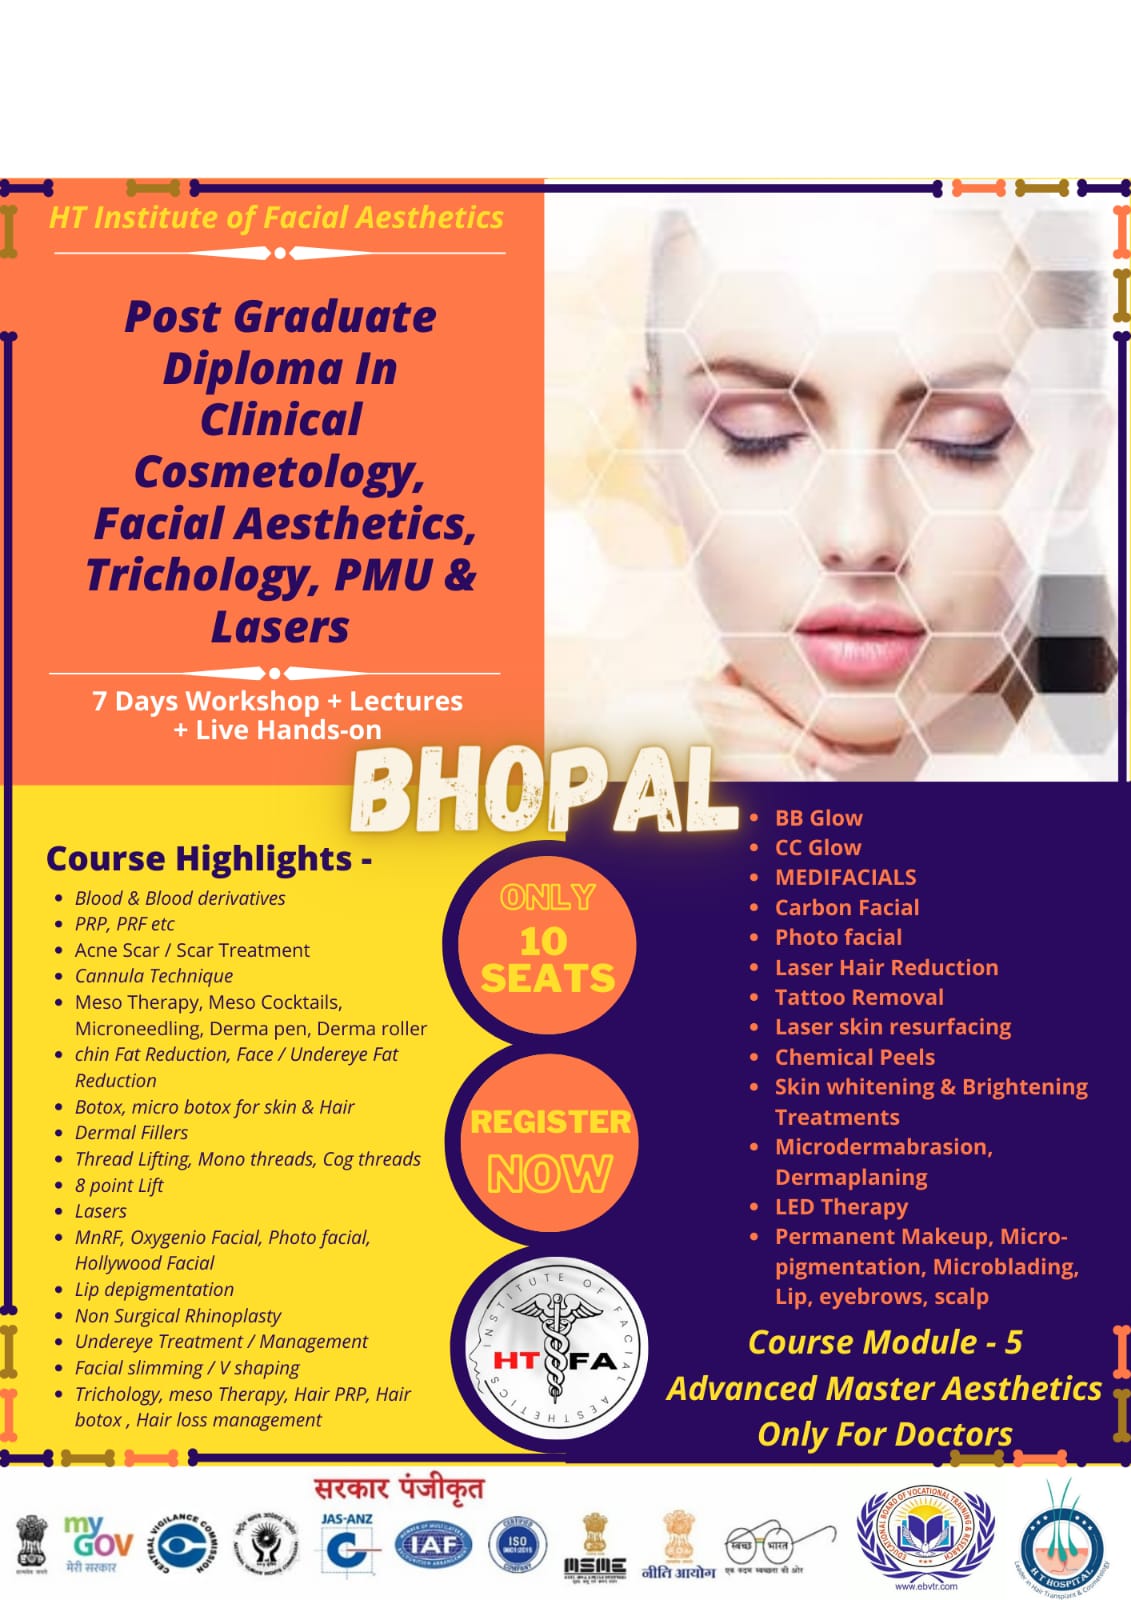 Post Graduate Diploma In Clinical Cosmetology, Facial Aesthetics,  Trichology PMU & Lasers - Best Hair Transplant Hospital In Bhopal